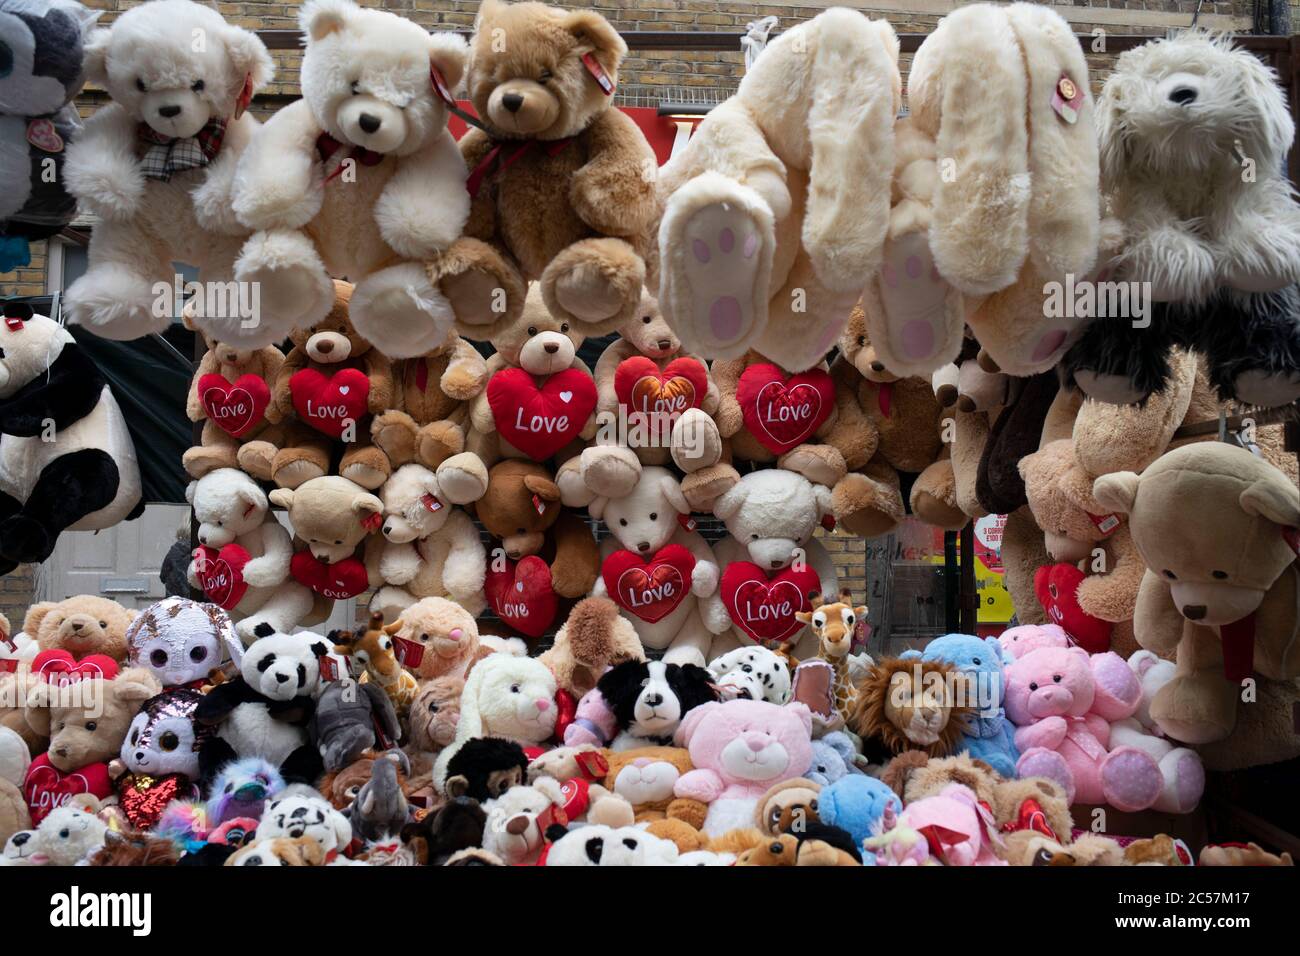 Teddy bear stall on Pettycoat Market in the City of London 2nd February 2020 in London, England, United Petticoat Lane Market is a fashion and clothing market in the